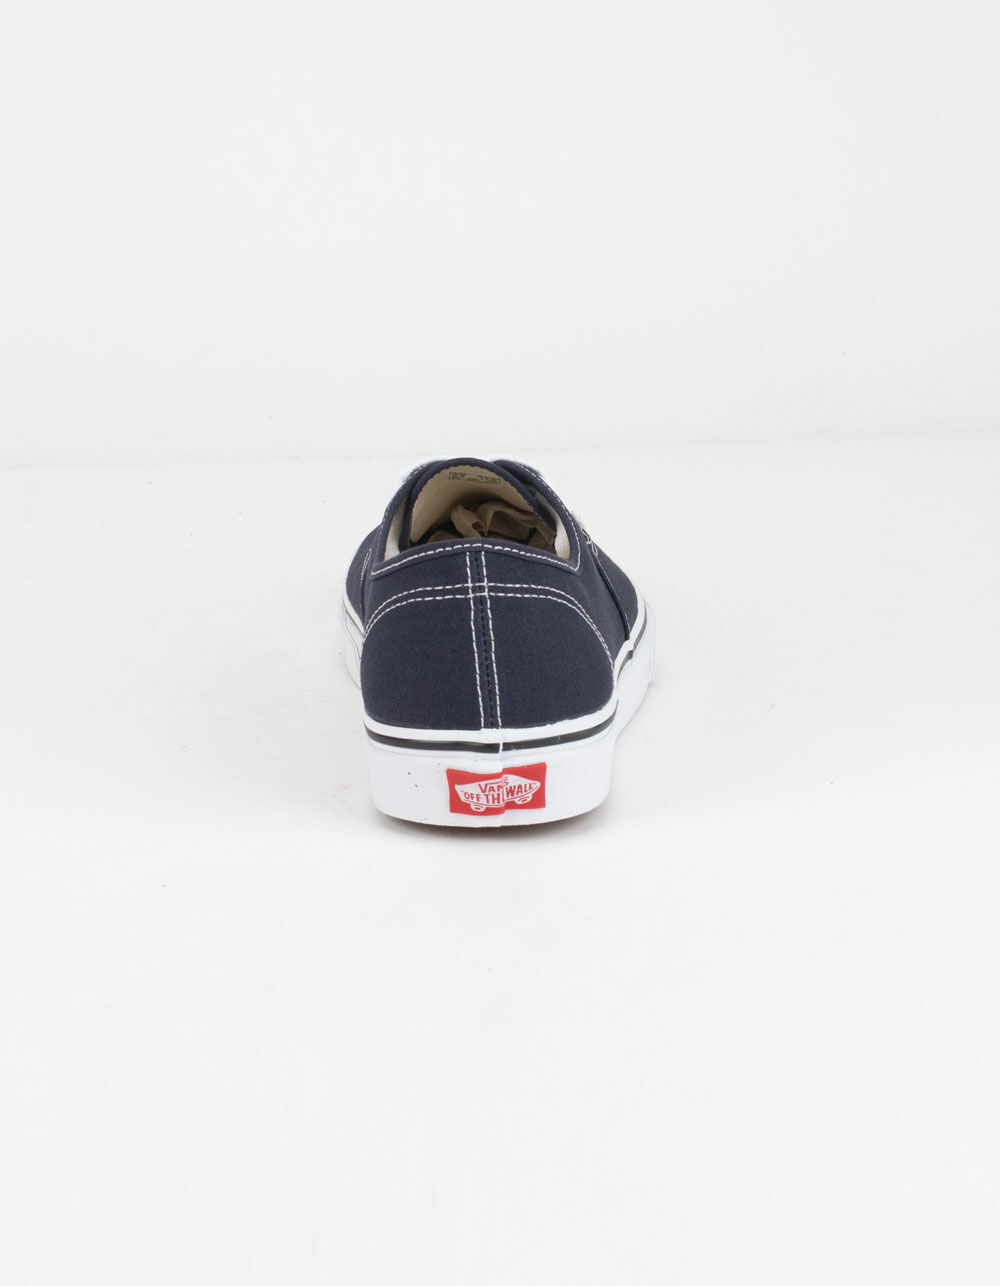 VANS Authentic Night Sky & True White Shoes image number 4